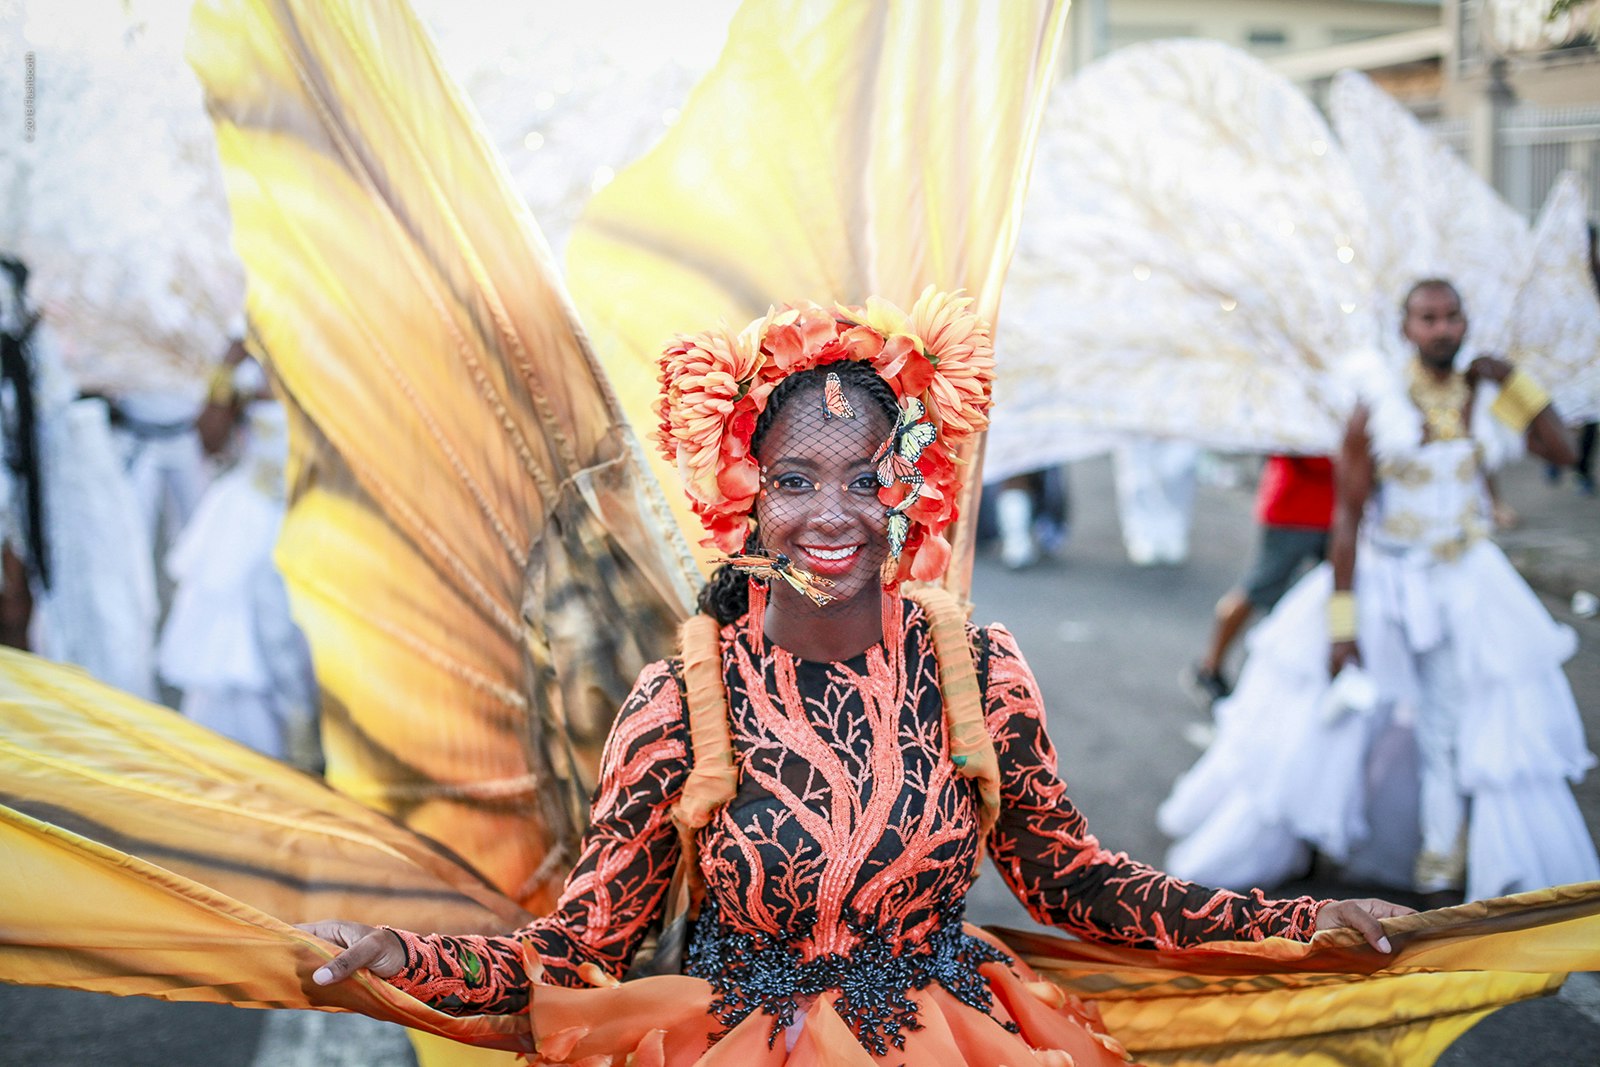 A woman in a traditional mas costume that resembles a sunflower spreads her petals at Carnival in Trinidad